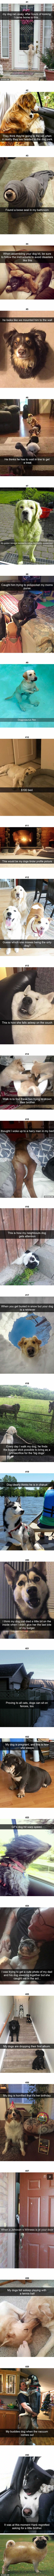 30 Hilarious Dog Snapchats That Are Impawsible Not To Laugh At